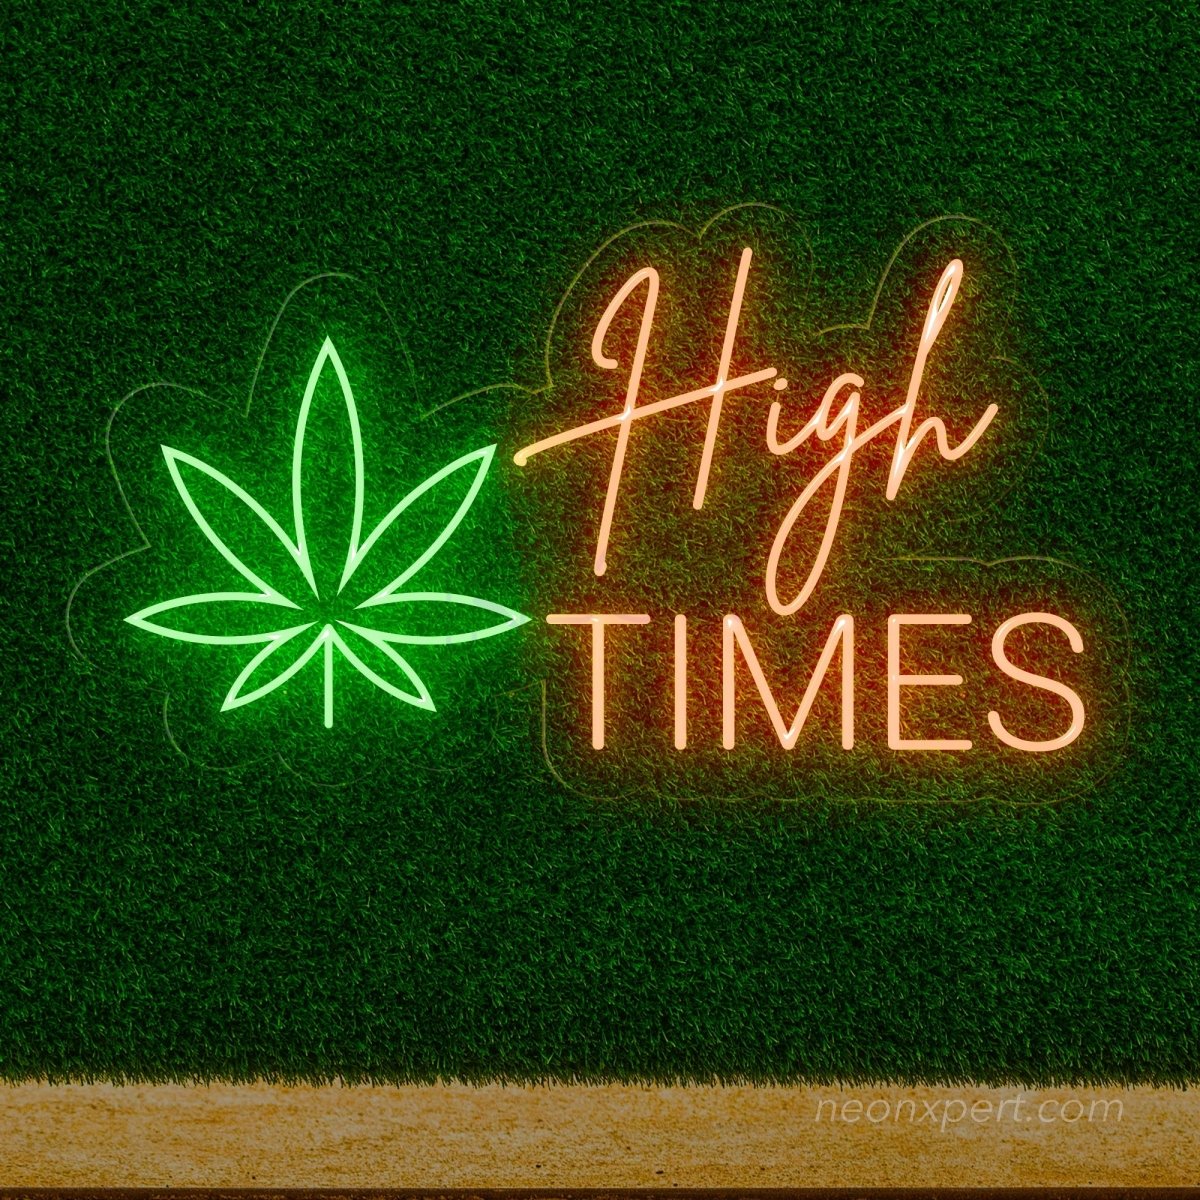 High Times Neon Sign - Laid-Back LED Decor for Relaxation Spaces - NeonXpert